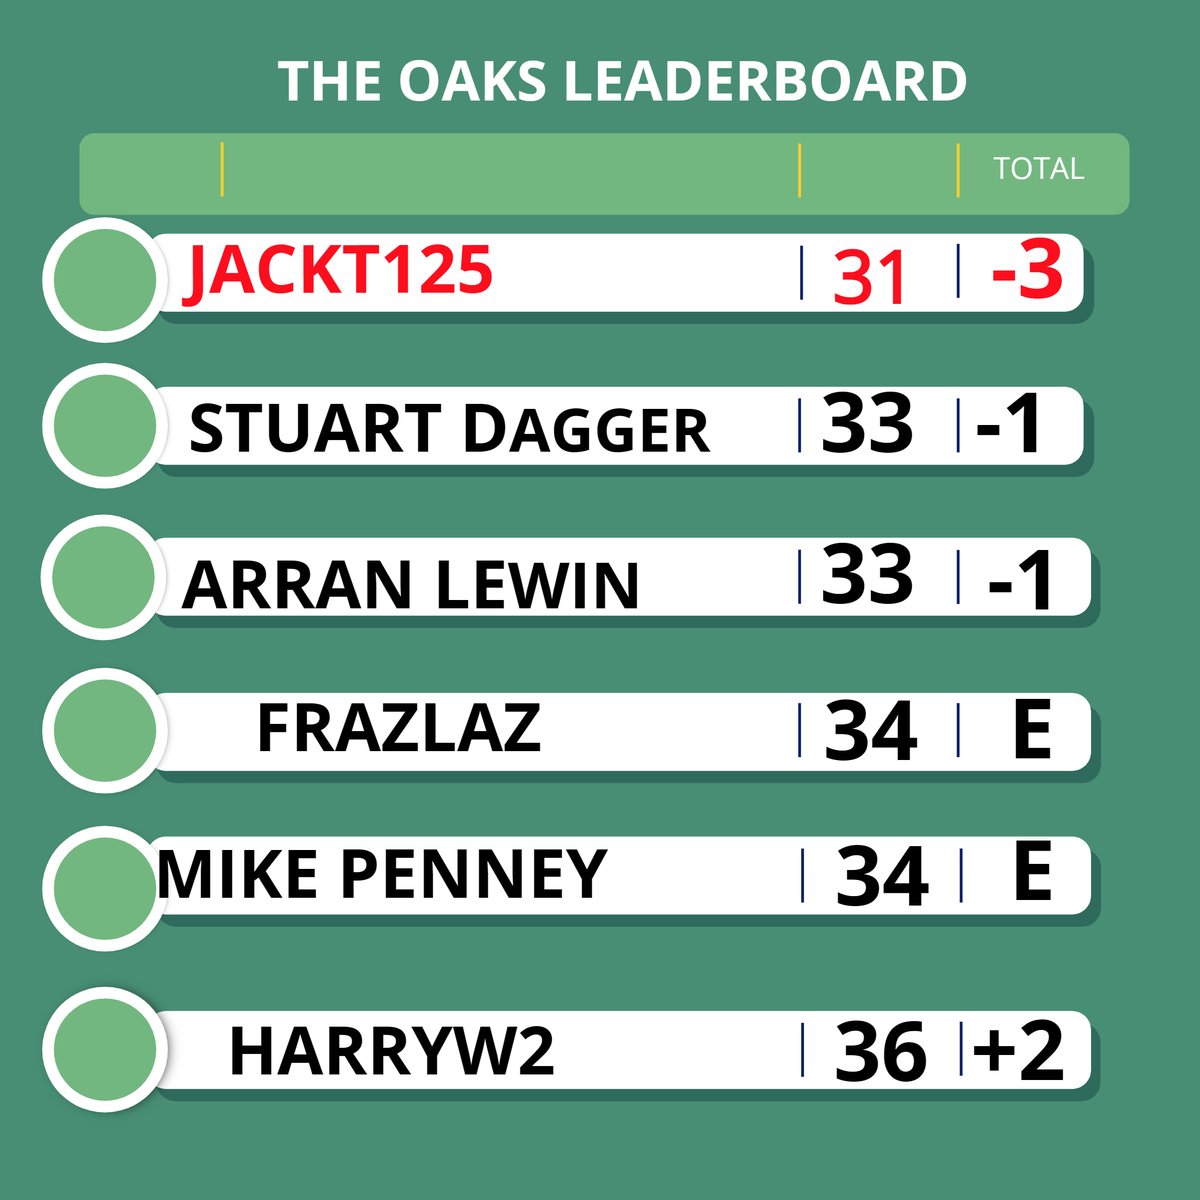 Congratulations to JACKT125!! Its Back-To-Back win with a great score of 31 (-3) to see off Stuart Dagger!! It's also the first week of our FREE Tour Championships - This week players will be battling it out at Royal Birkdale!! Why not put your name down now!!!!